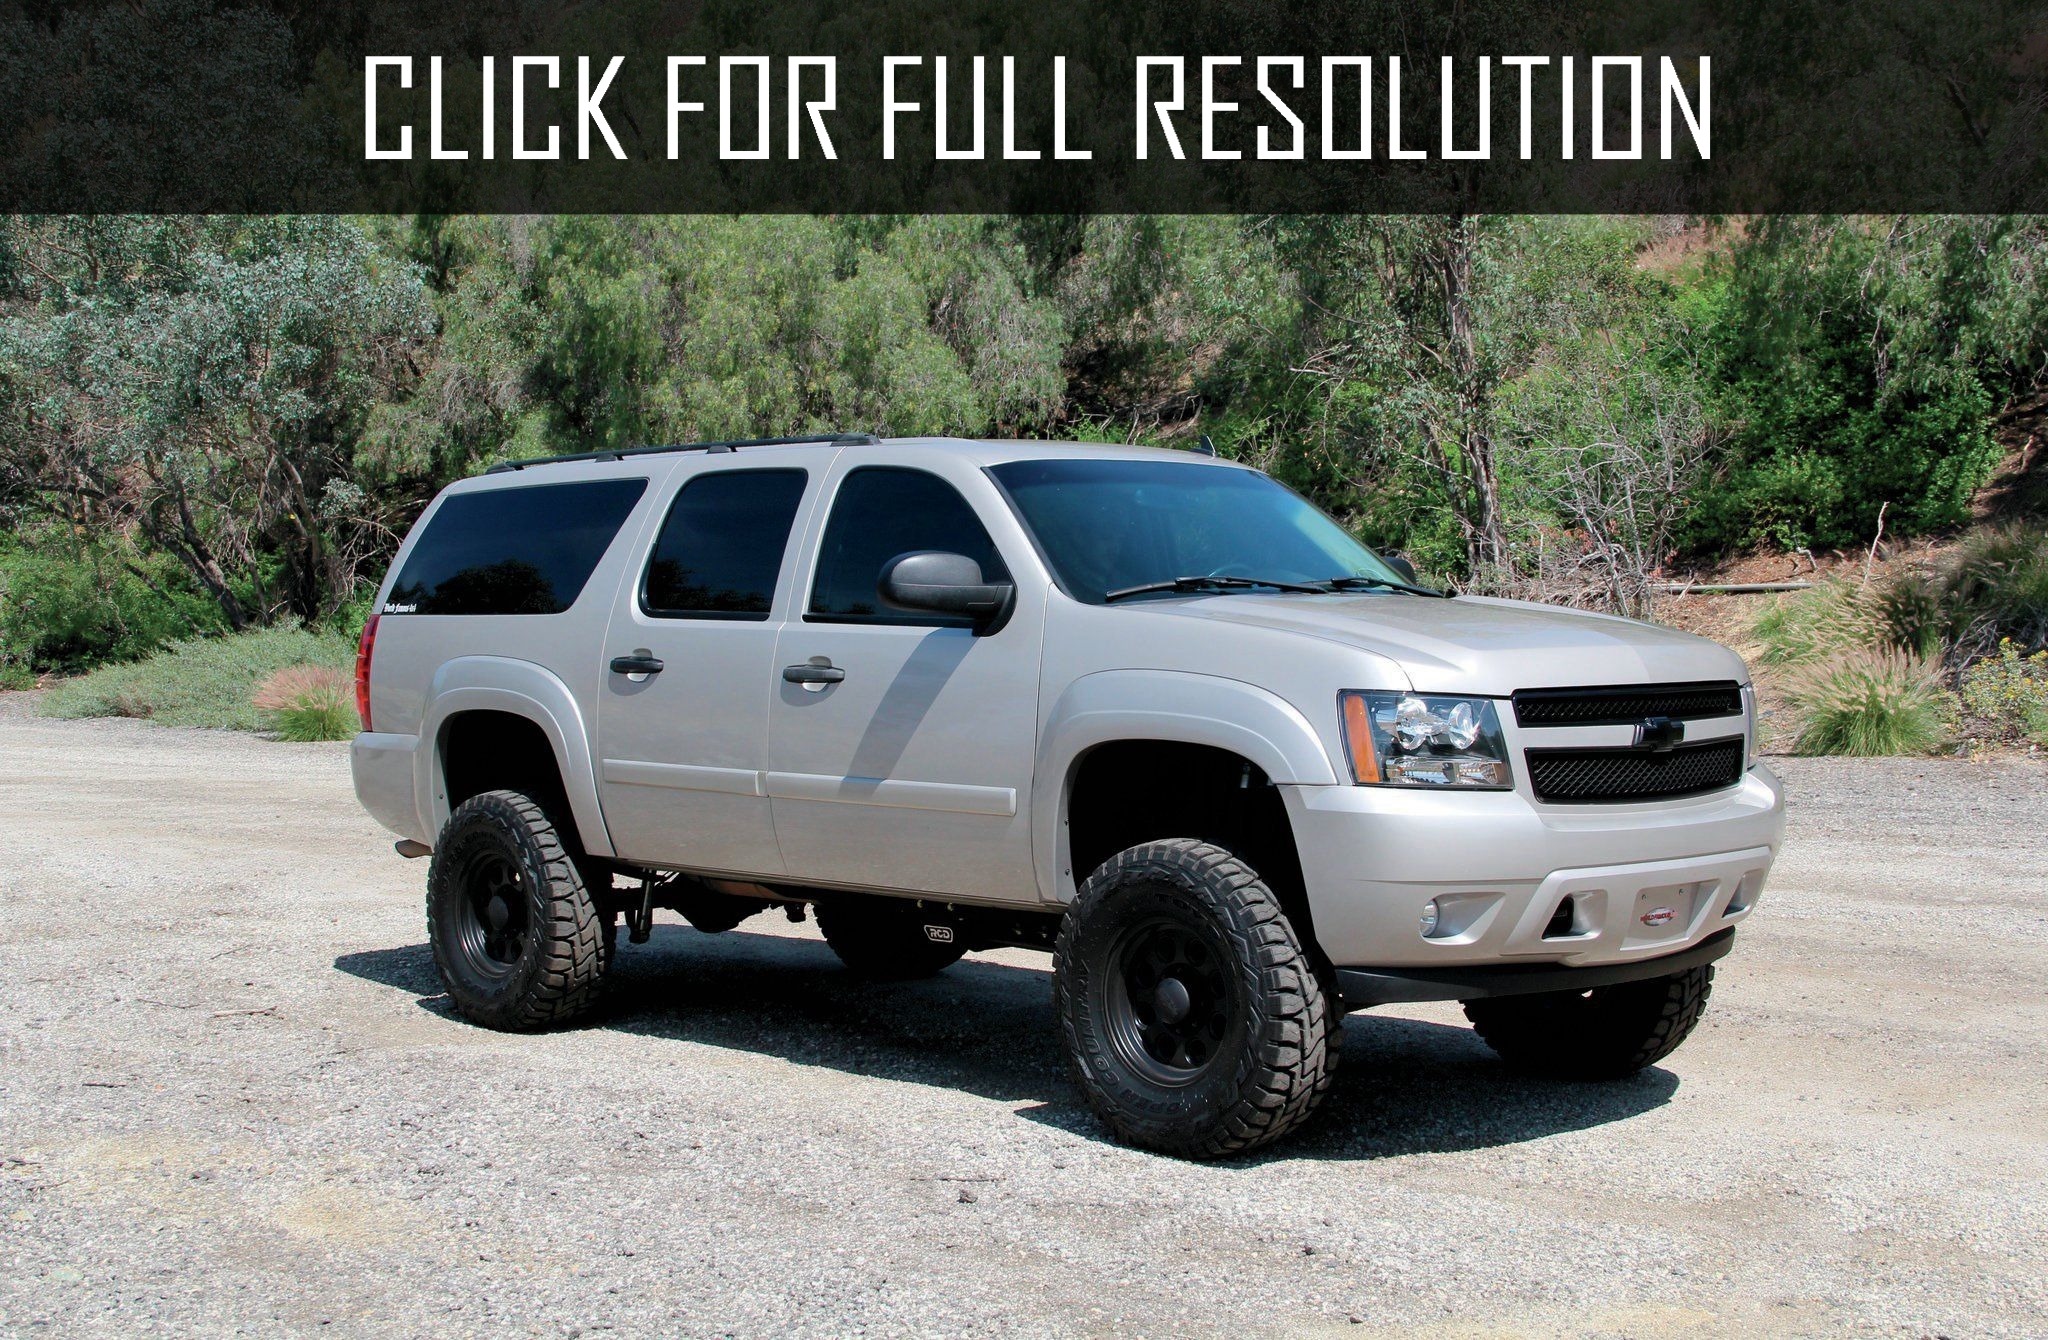 Chevrolet Suburban Lifted amazing photo gallery, some information and